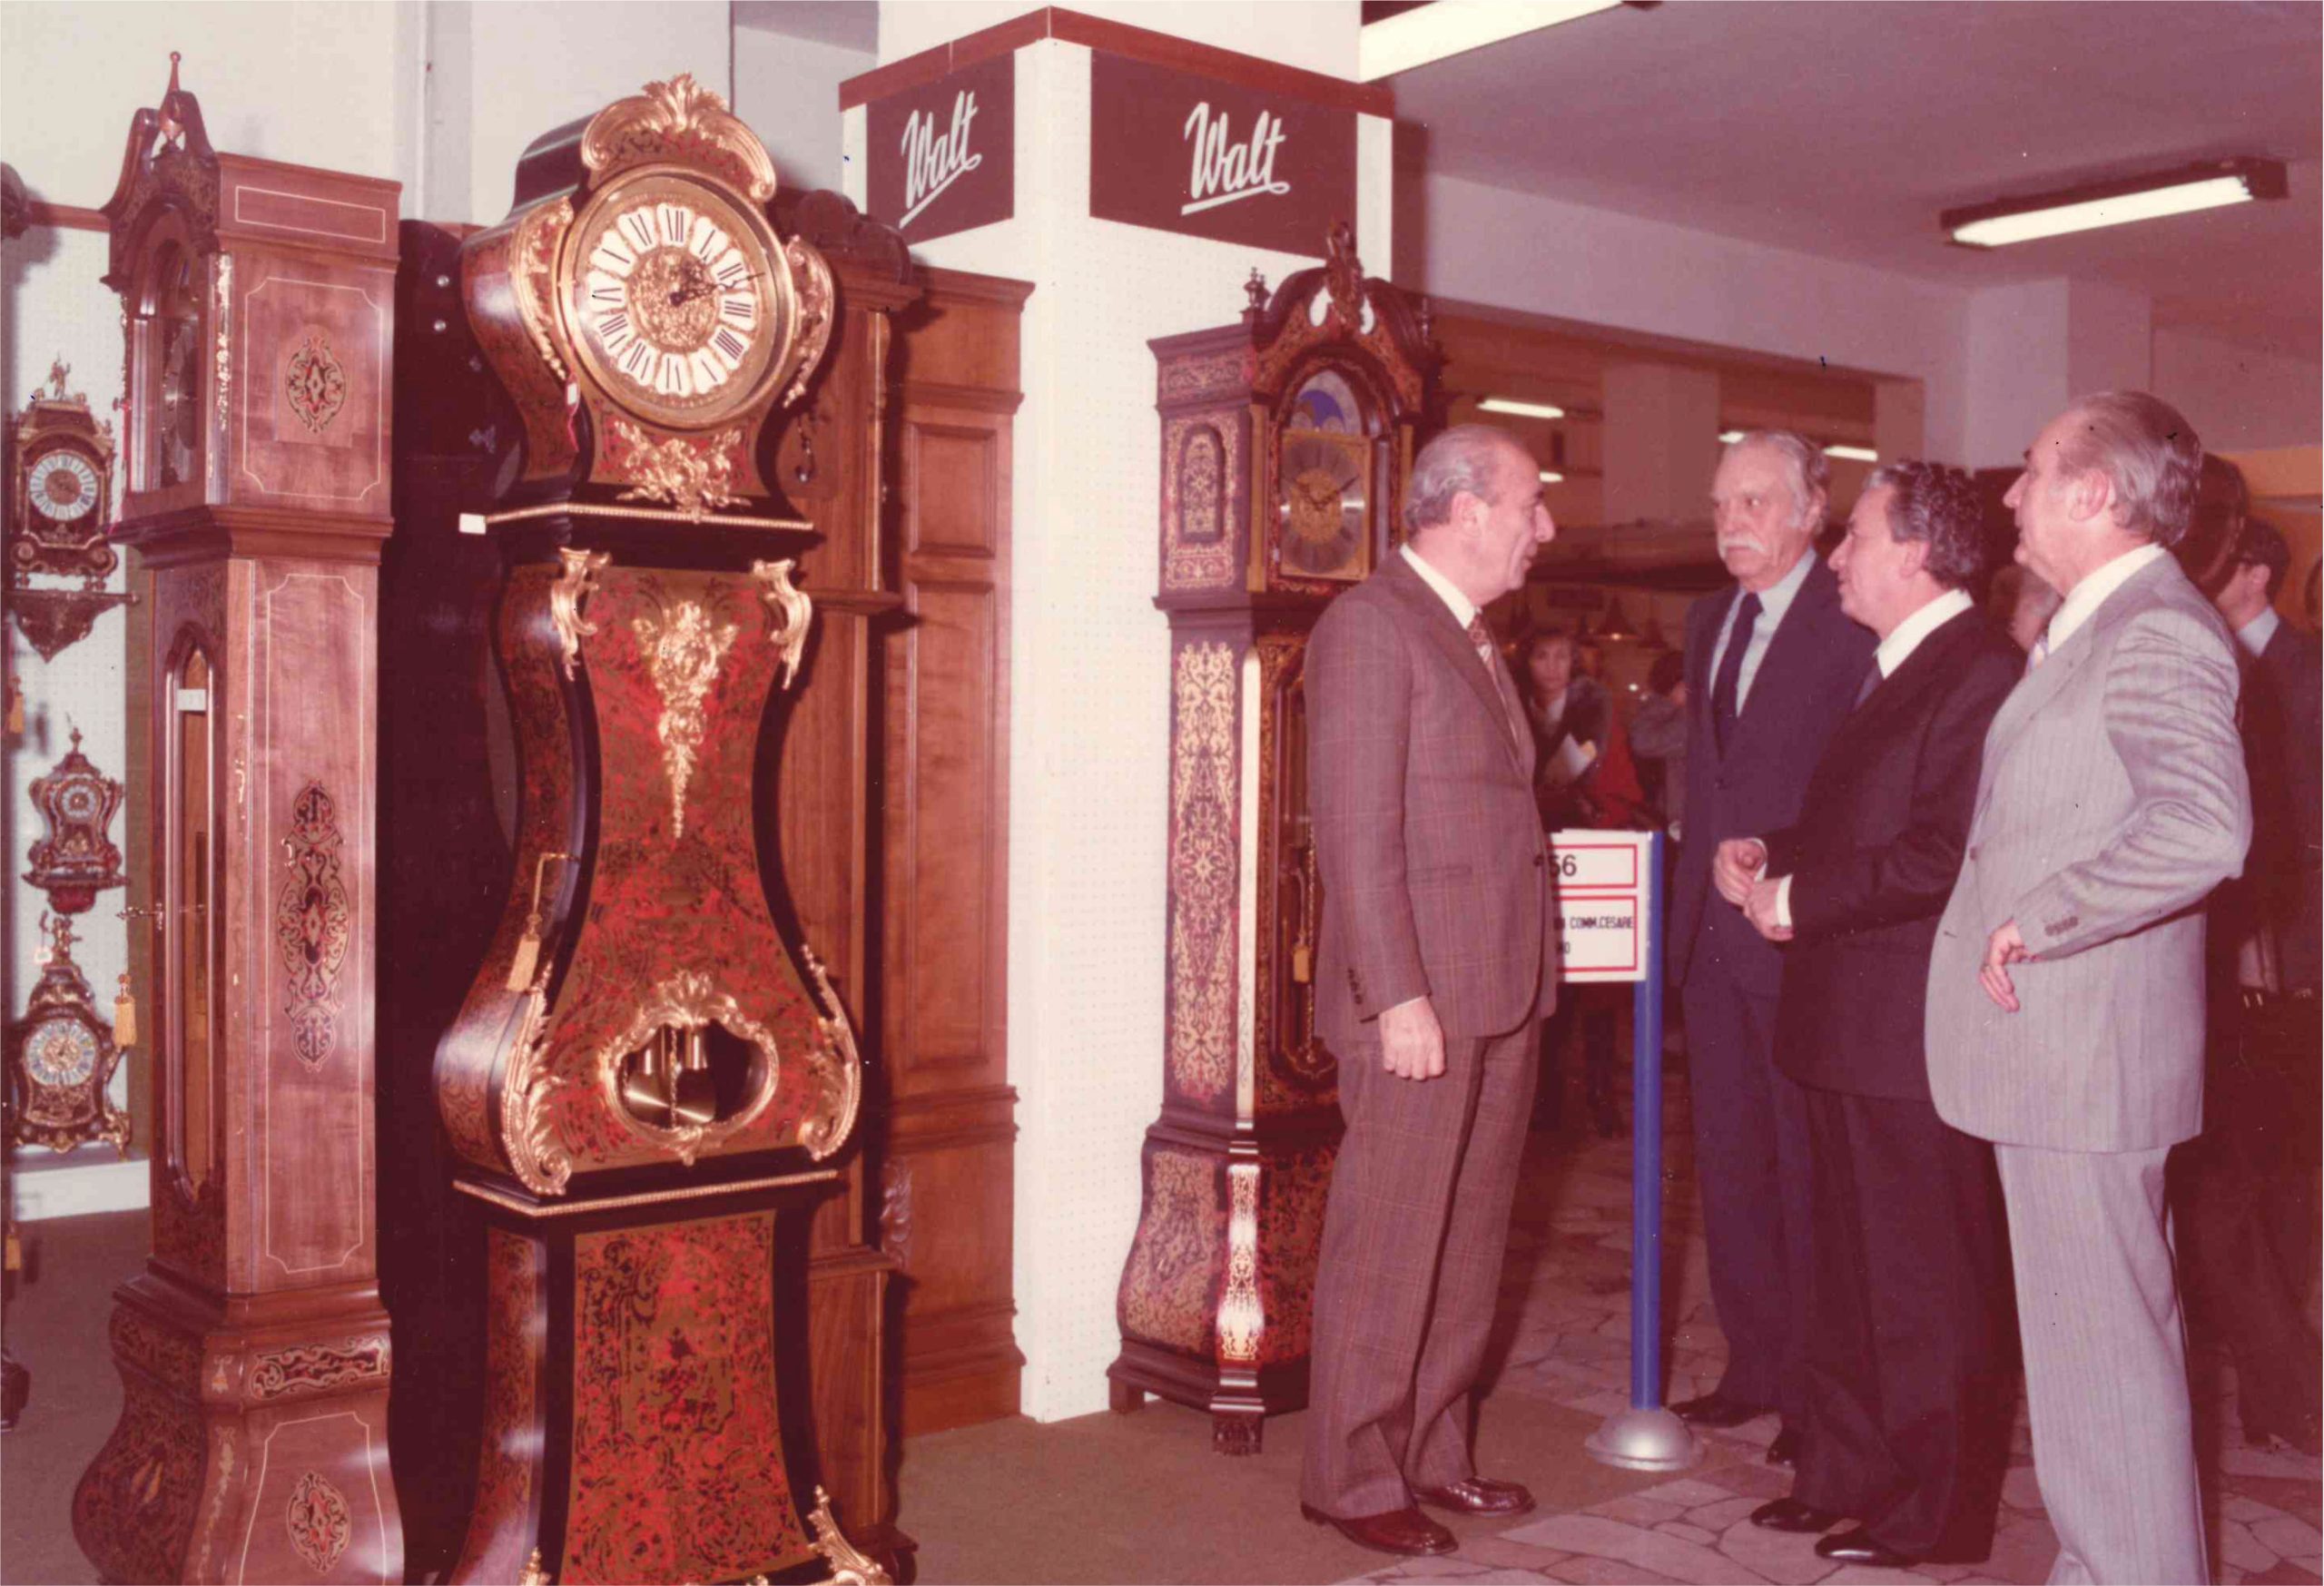 Walt Clocks exhibited at a trade show in Milan